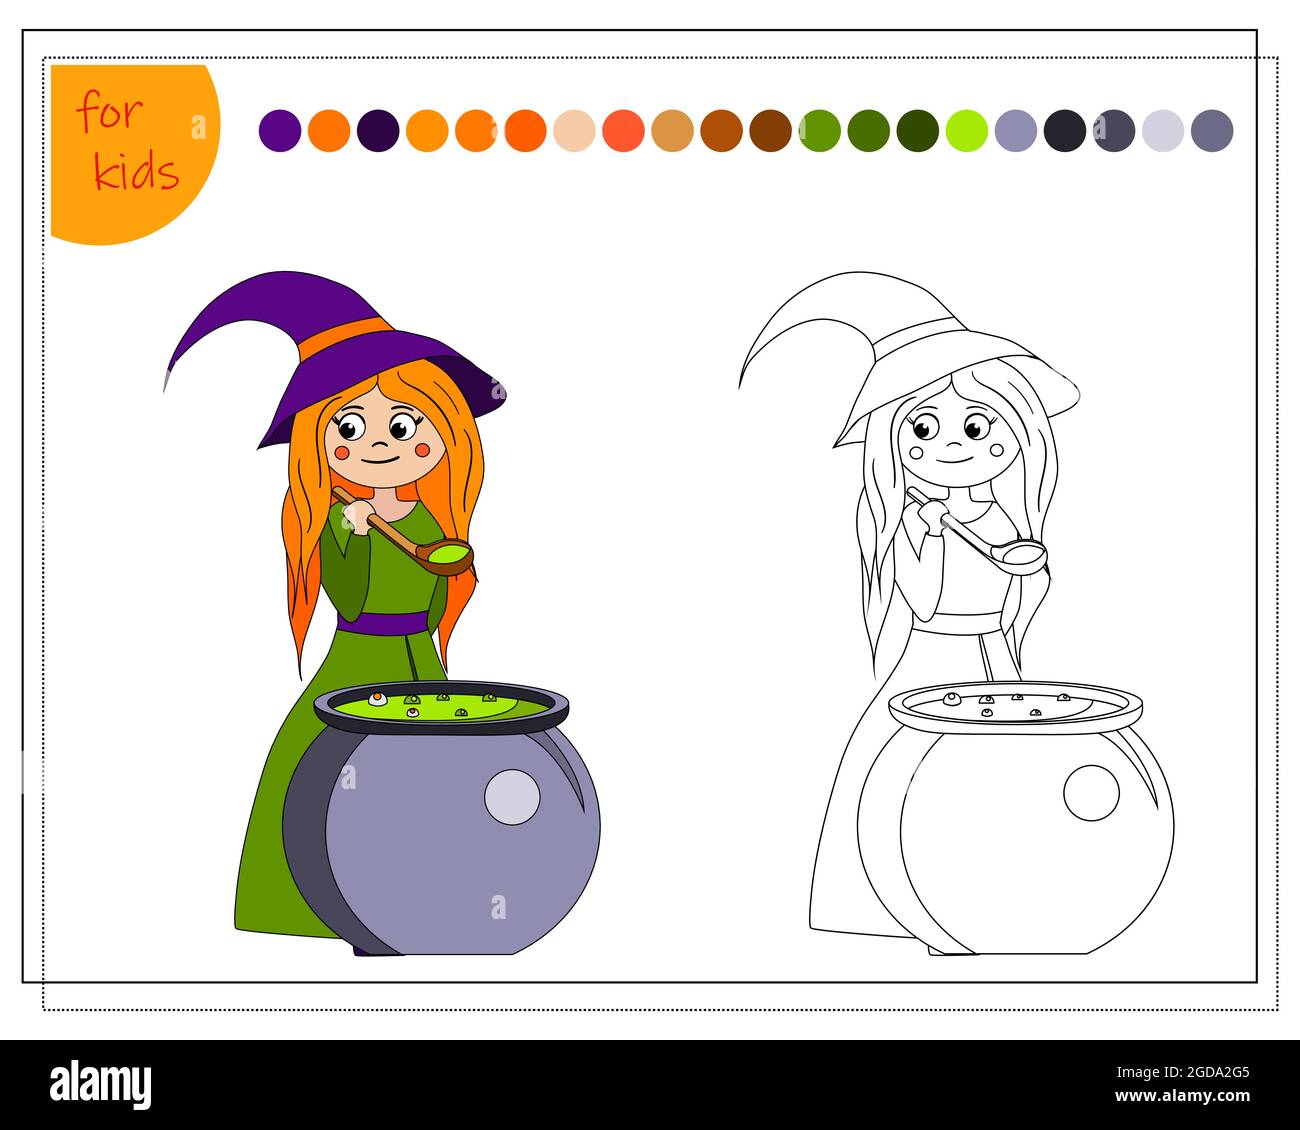 https://c8.alamy.com/comp/2GDA2G5/coloring-book-for-children-by-colors-cartoon-witch-cooks-a-potion-in-a-cauldron-halloween-vector-isolated-on-a-white-background-2GDA2G5.jpg